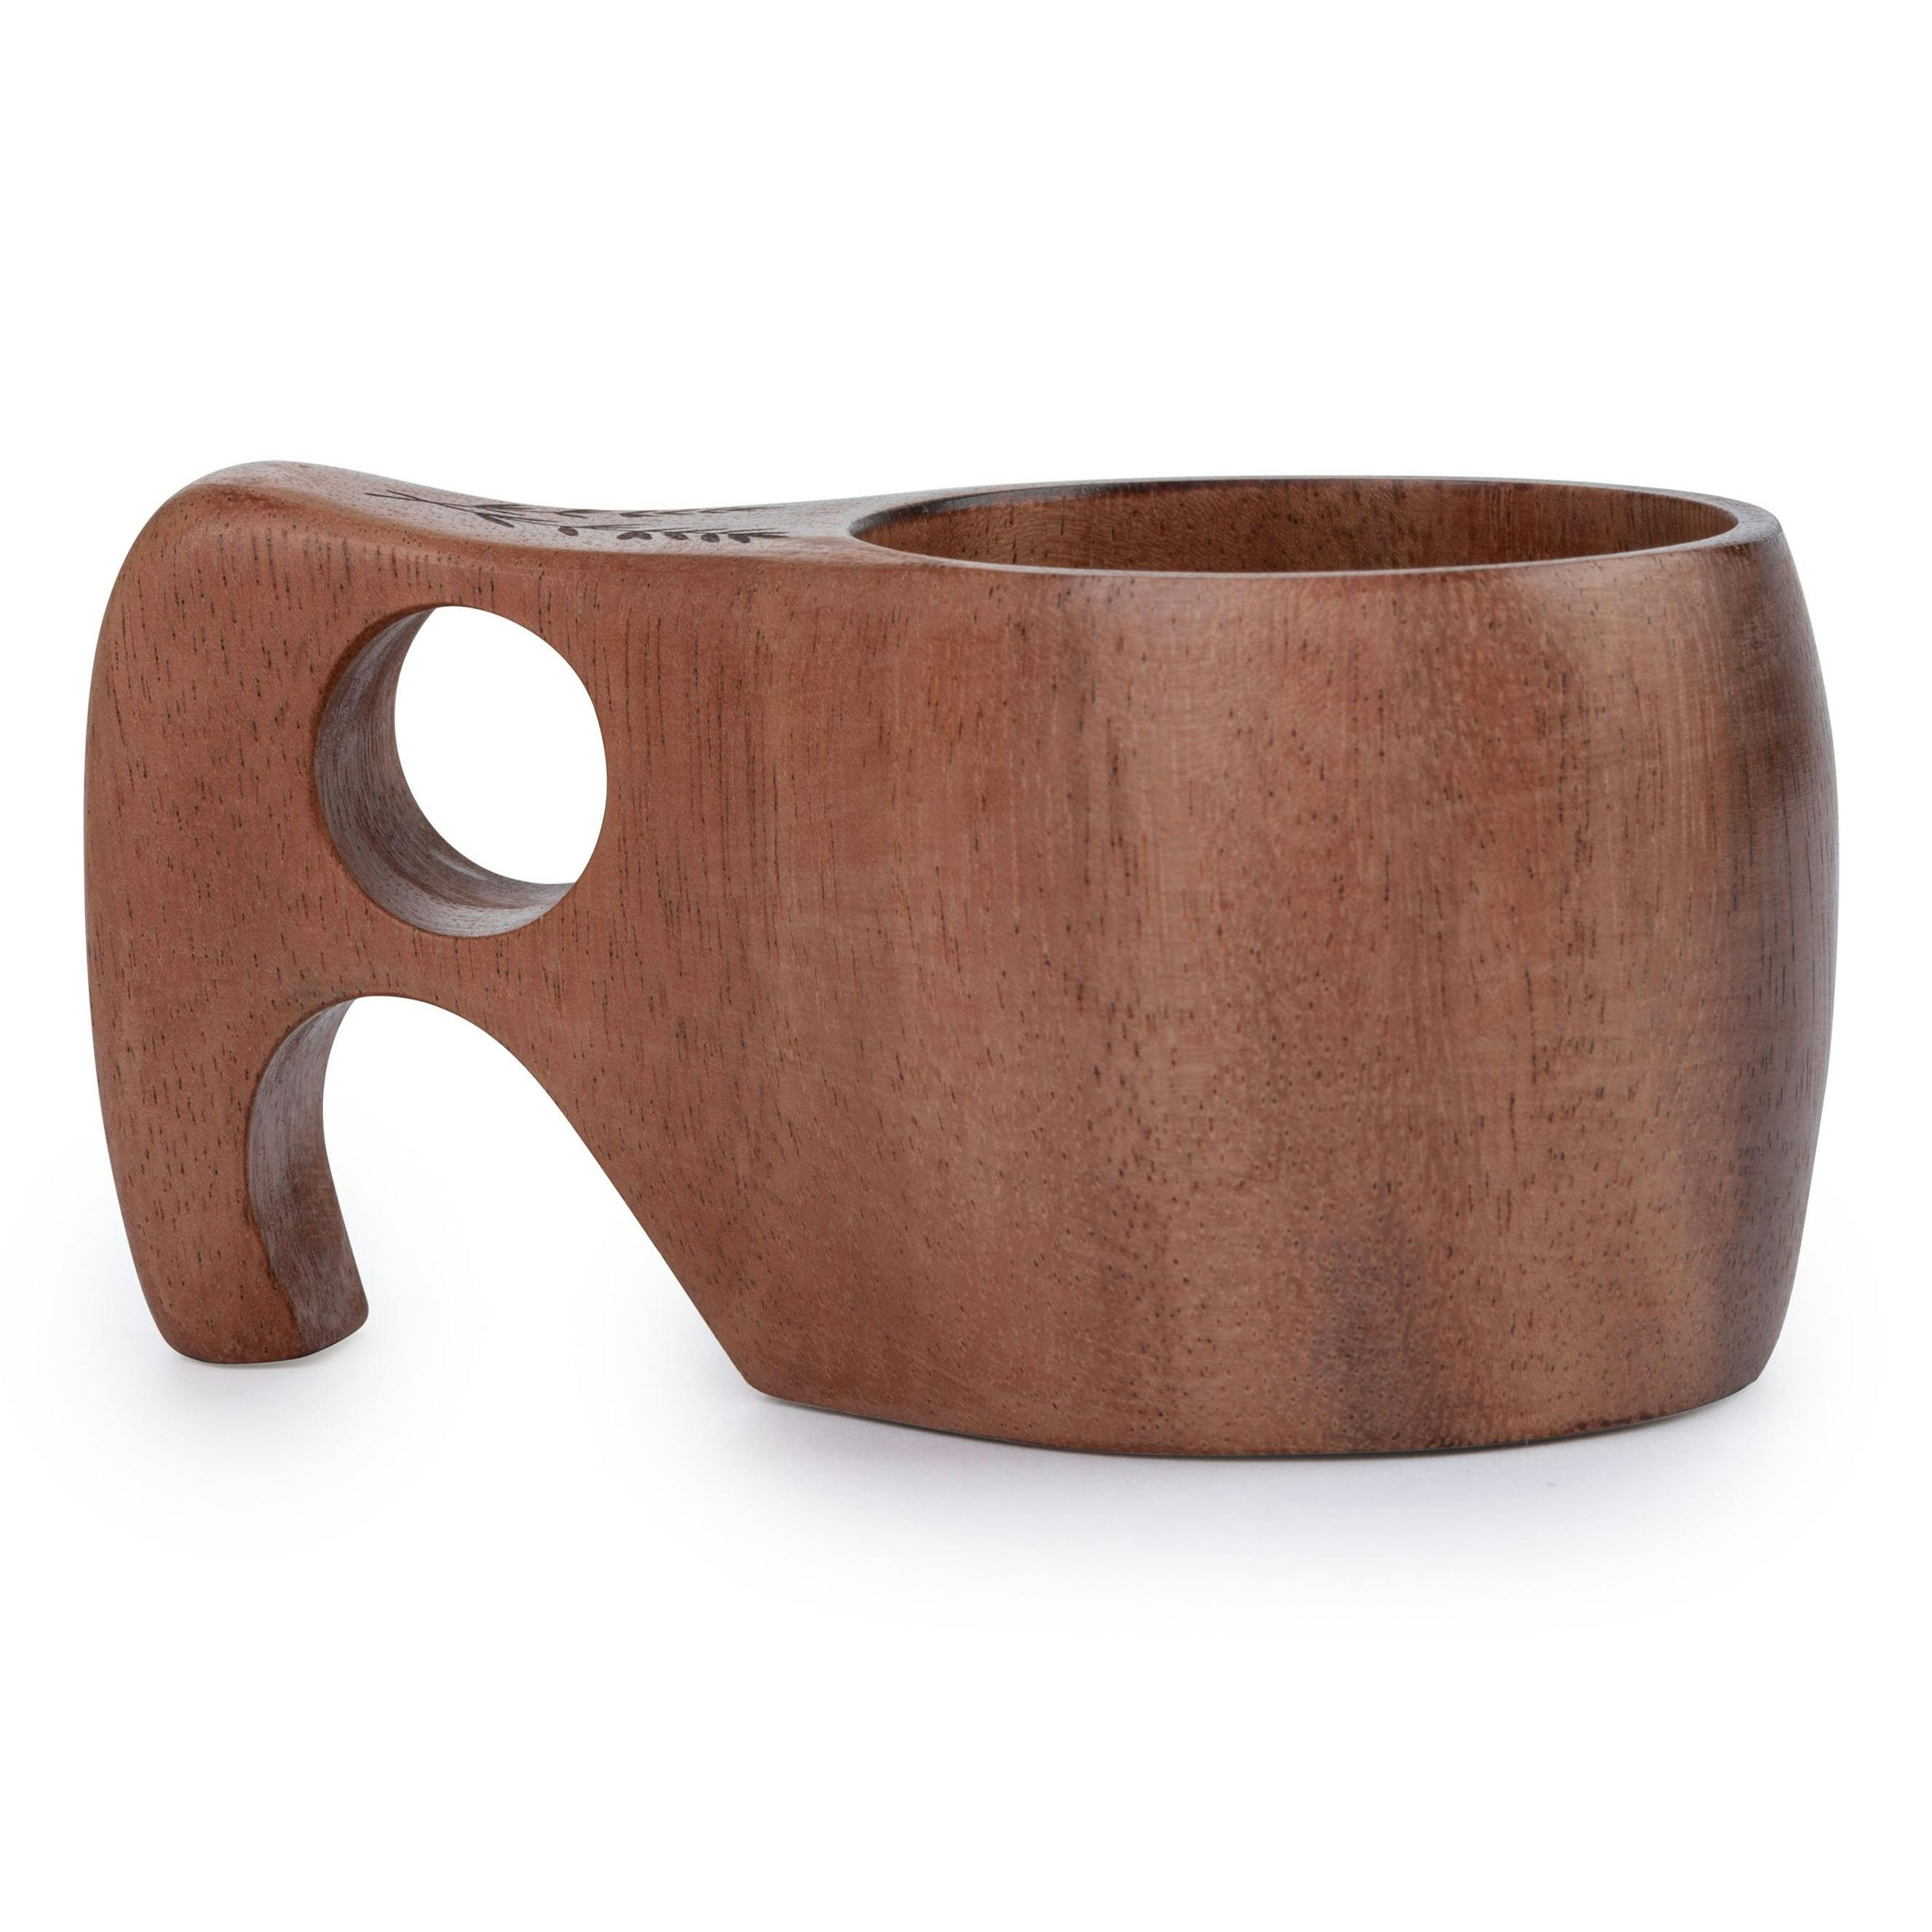 Kuksa Cup - Small